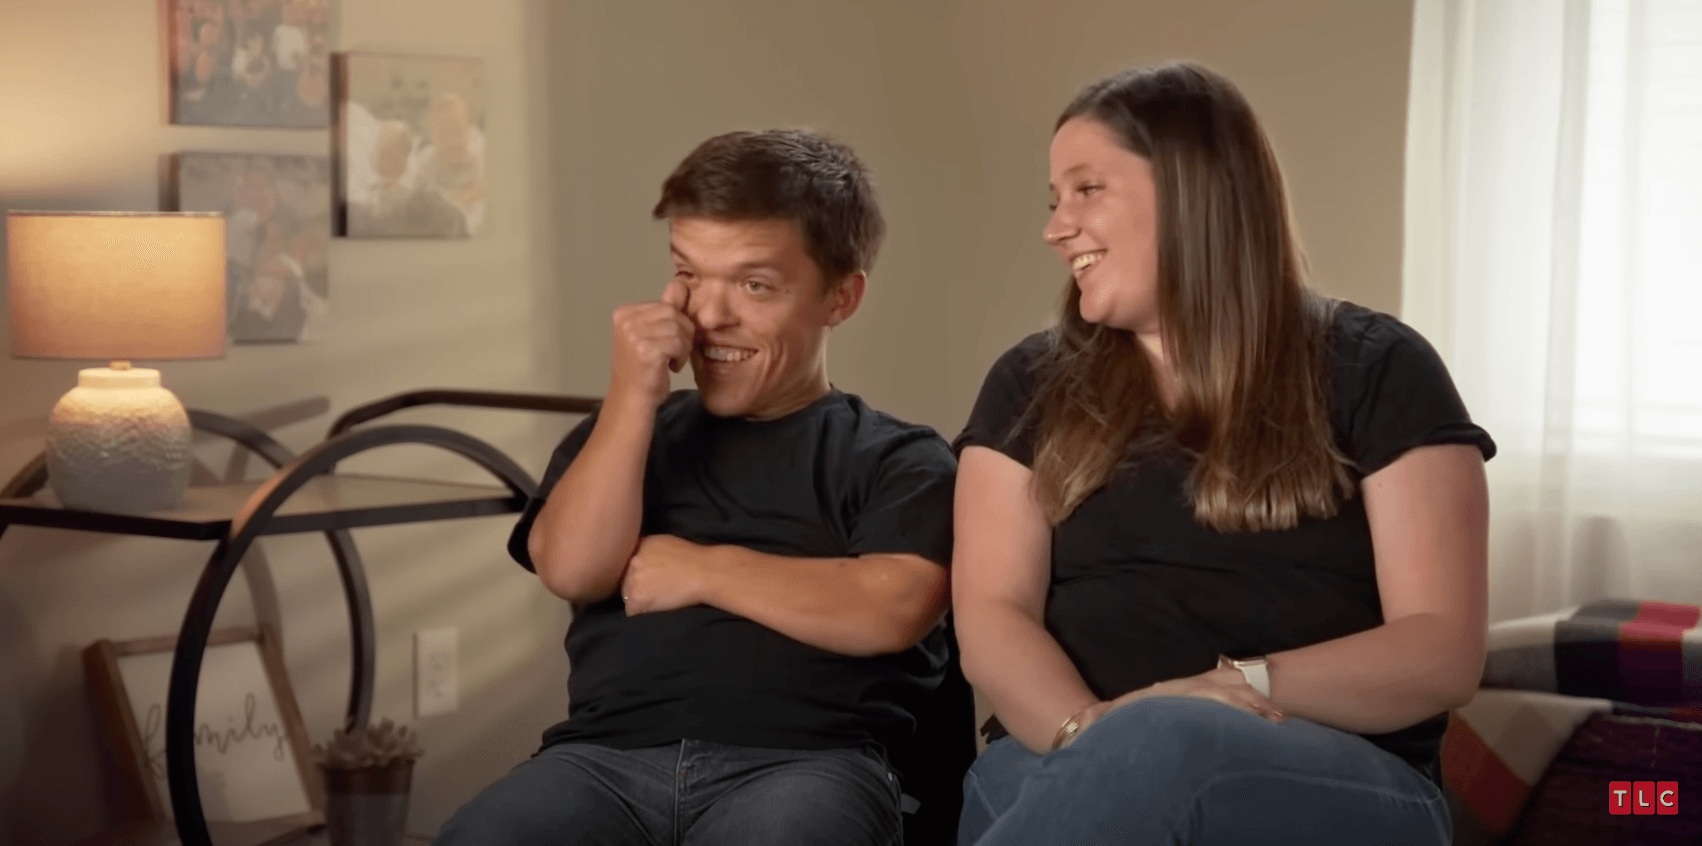 Zach and Tori Roloff from 'Little People, Big World' sitting on a couch laughing